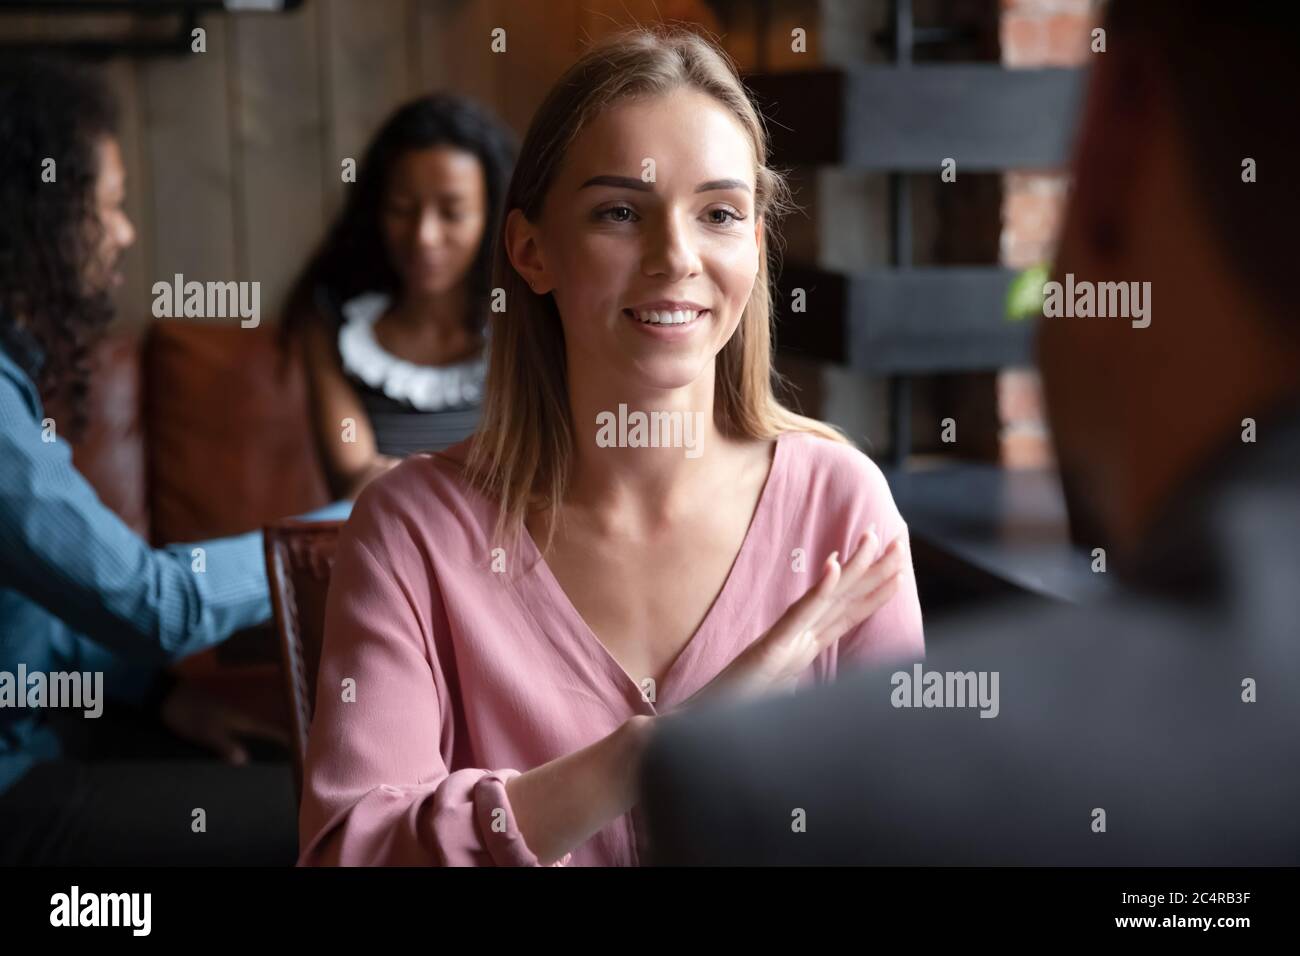 Woman participating in speed dating chatting with guy in cafe Stock Photo